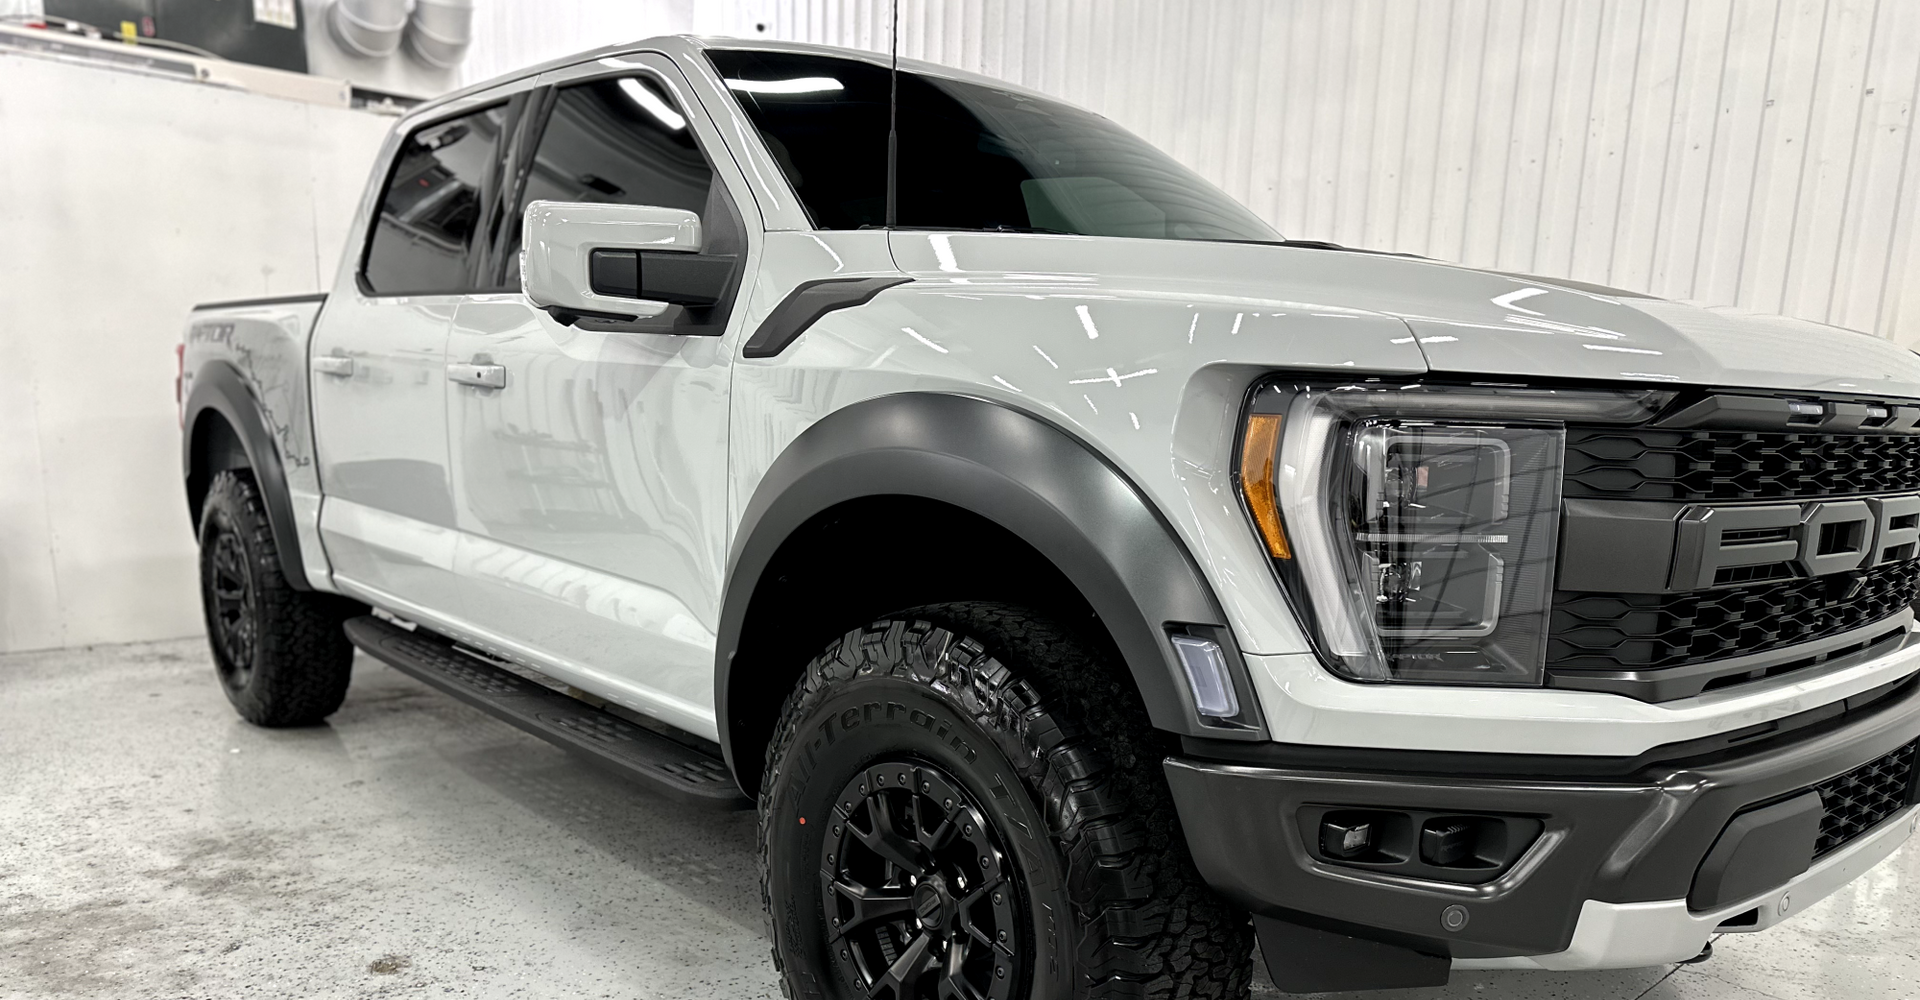 A white ford raptor truck is parked in a garage.